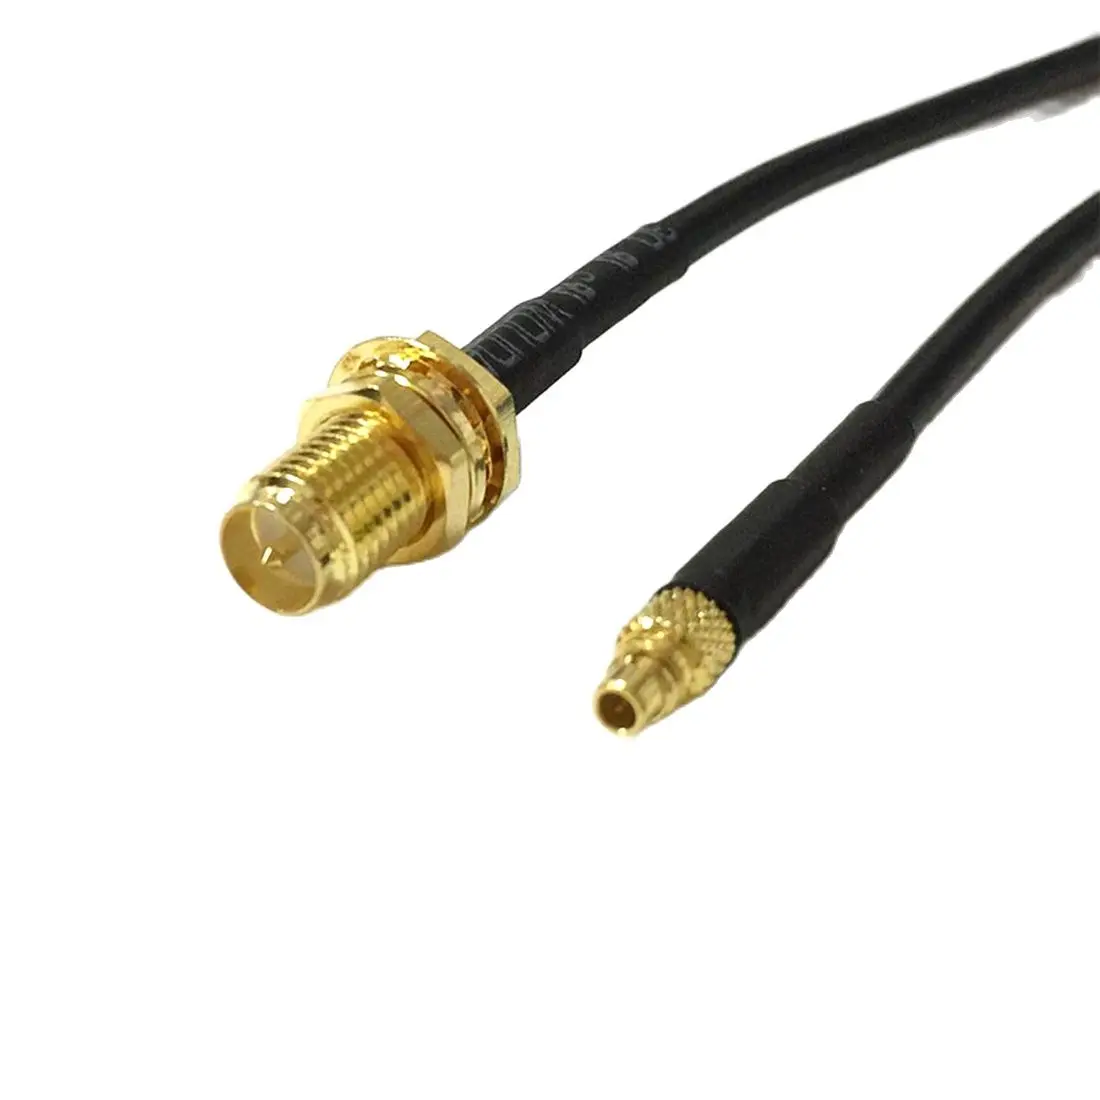 New RP-SMA  Female Jack Nut  Switch MMCX  Male Straight Pigtail Cable RG174  RG316 RG178 Wholesale 10/15/20/30/50/100cm